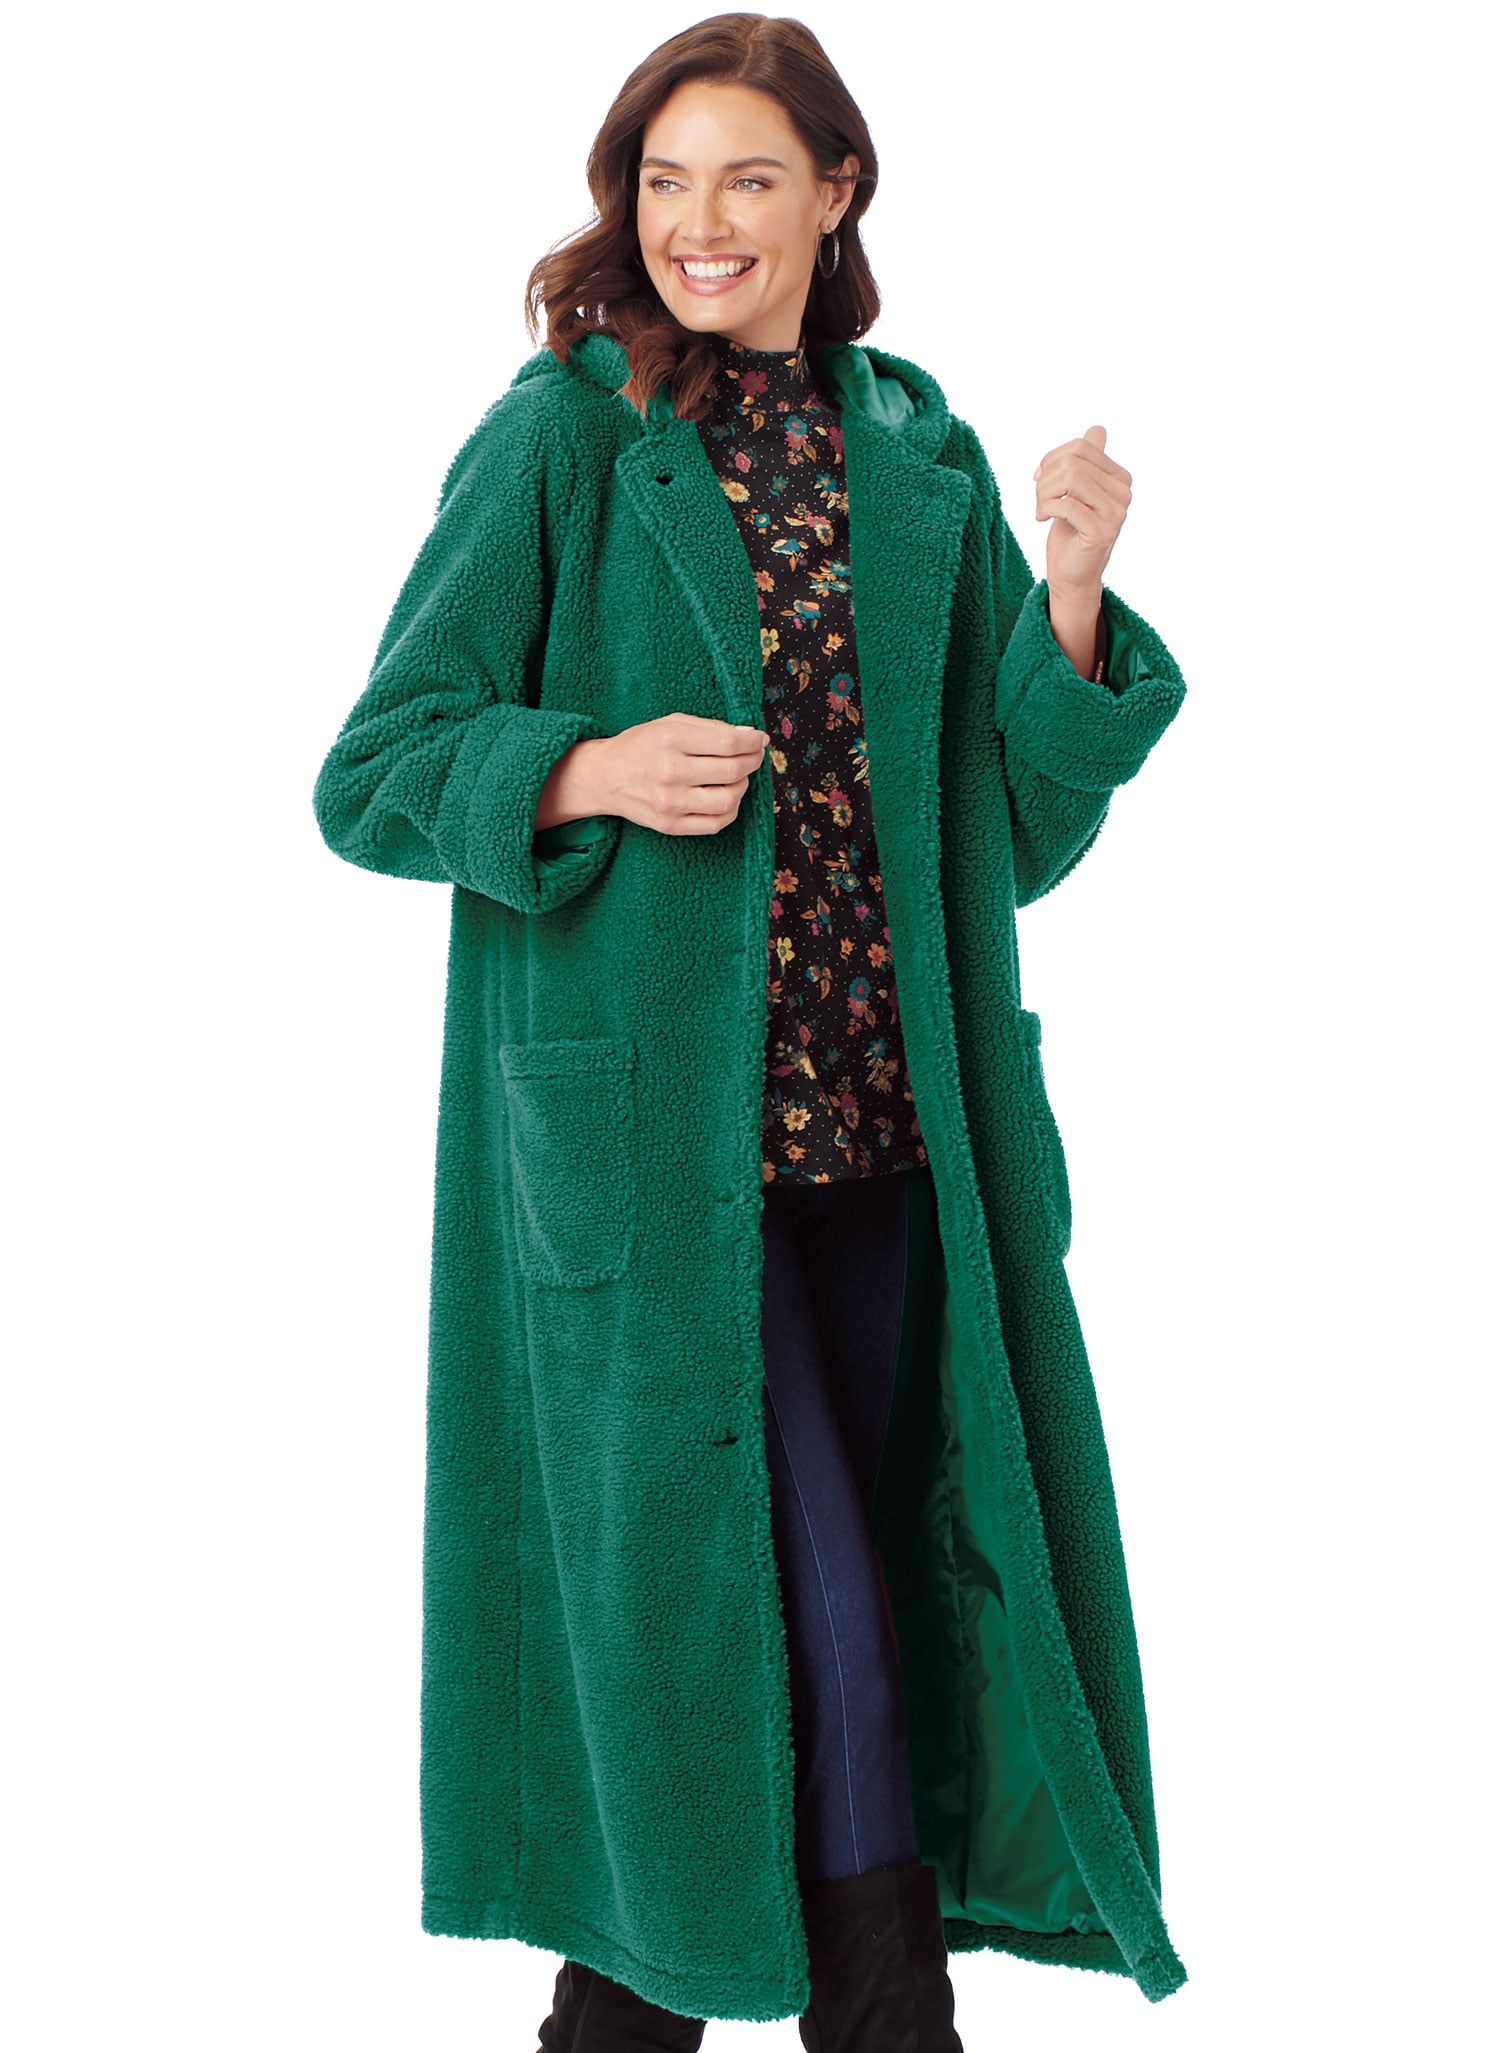 Long Coat with Button Front and Cuff Sleeves Black XL AmeriMark Women’s Berber Coat 